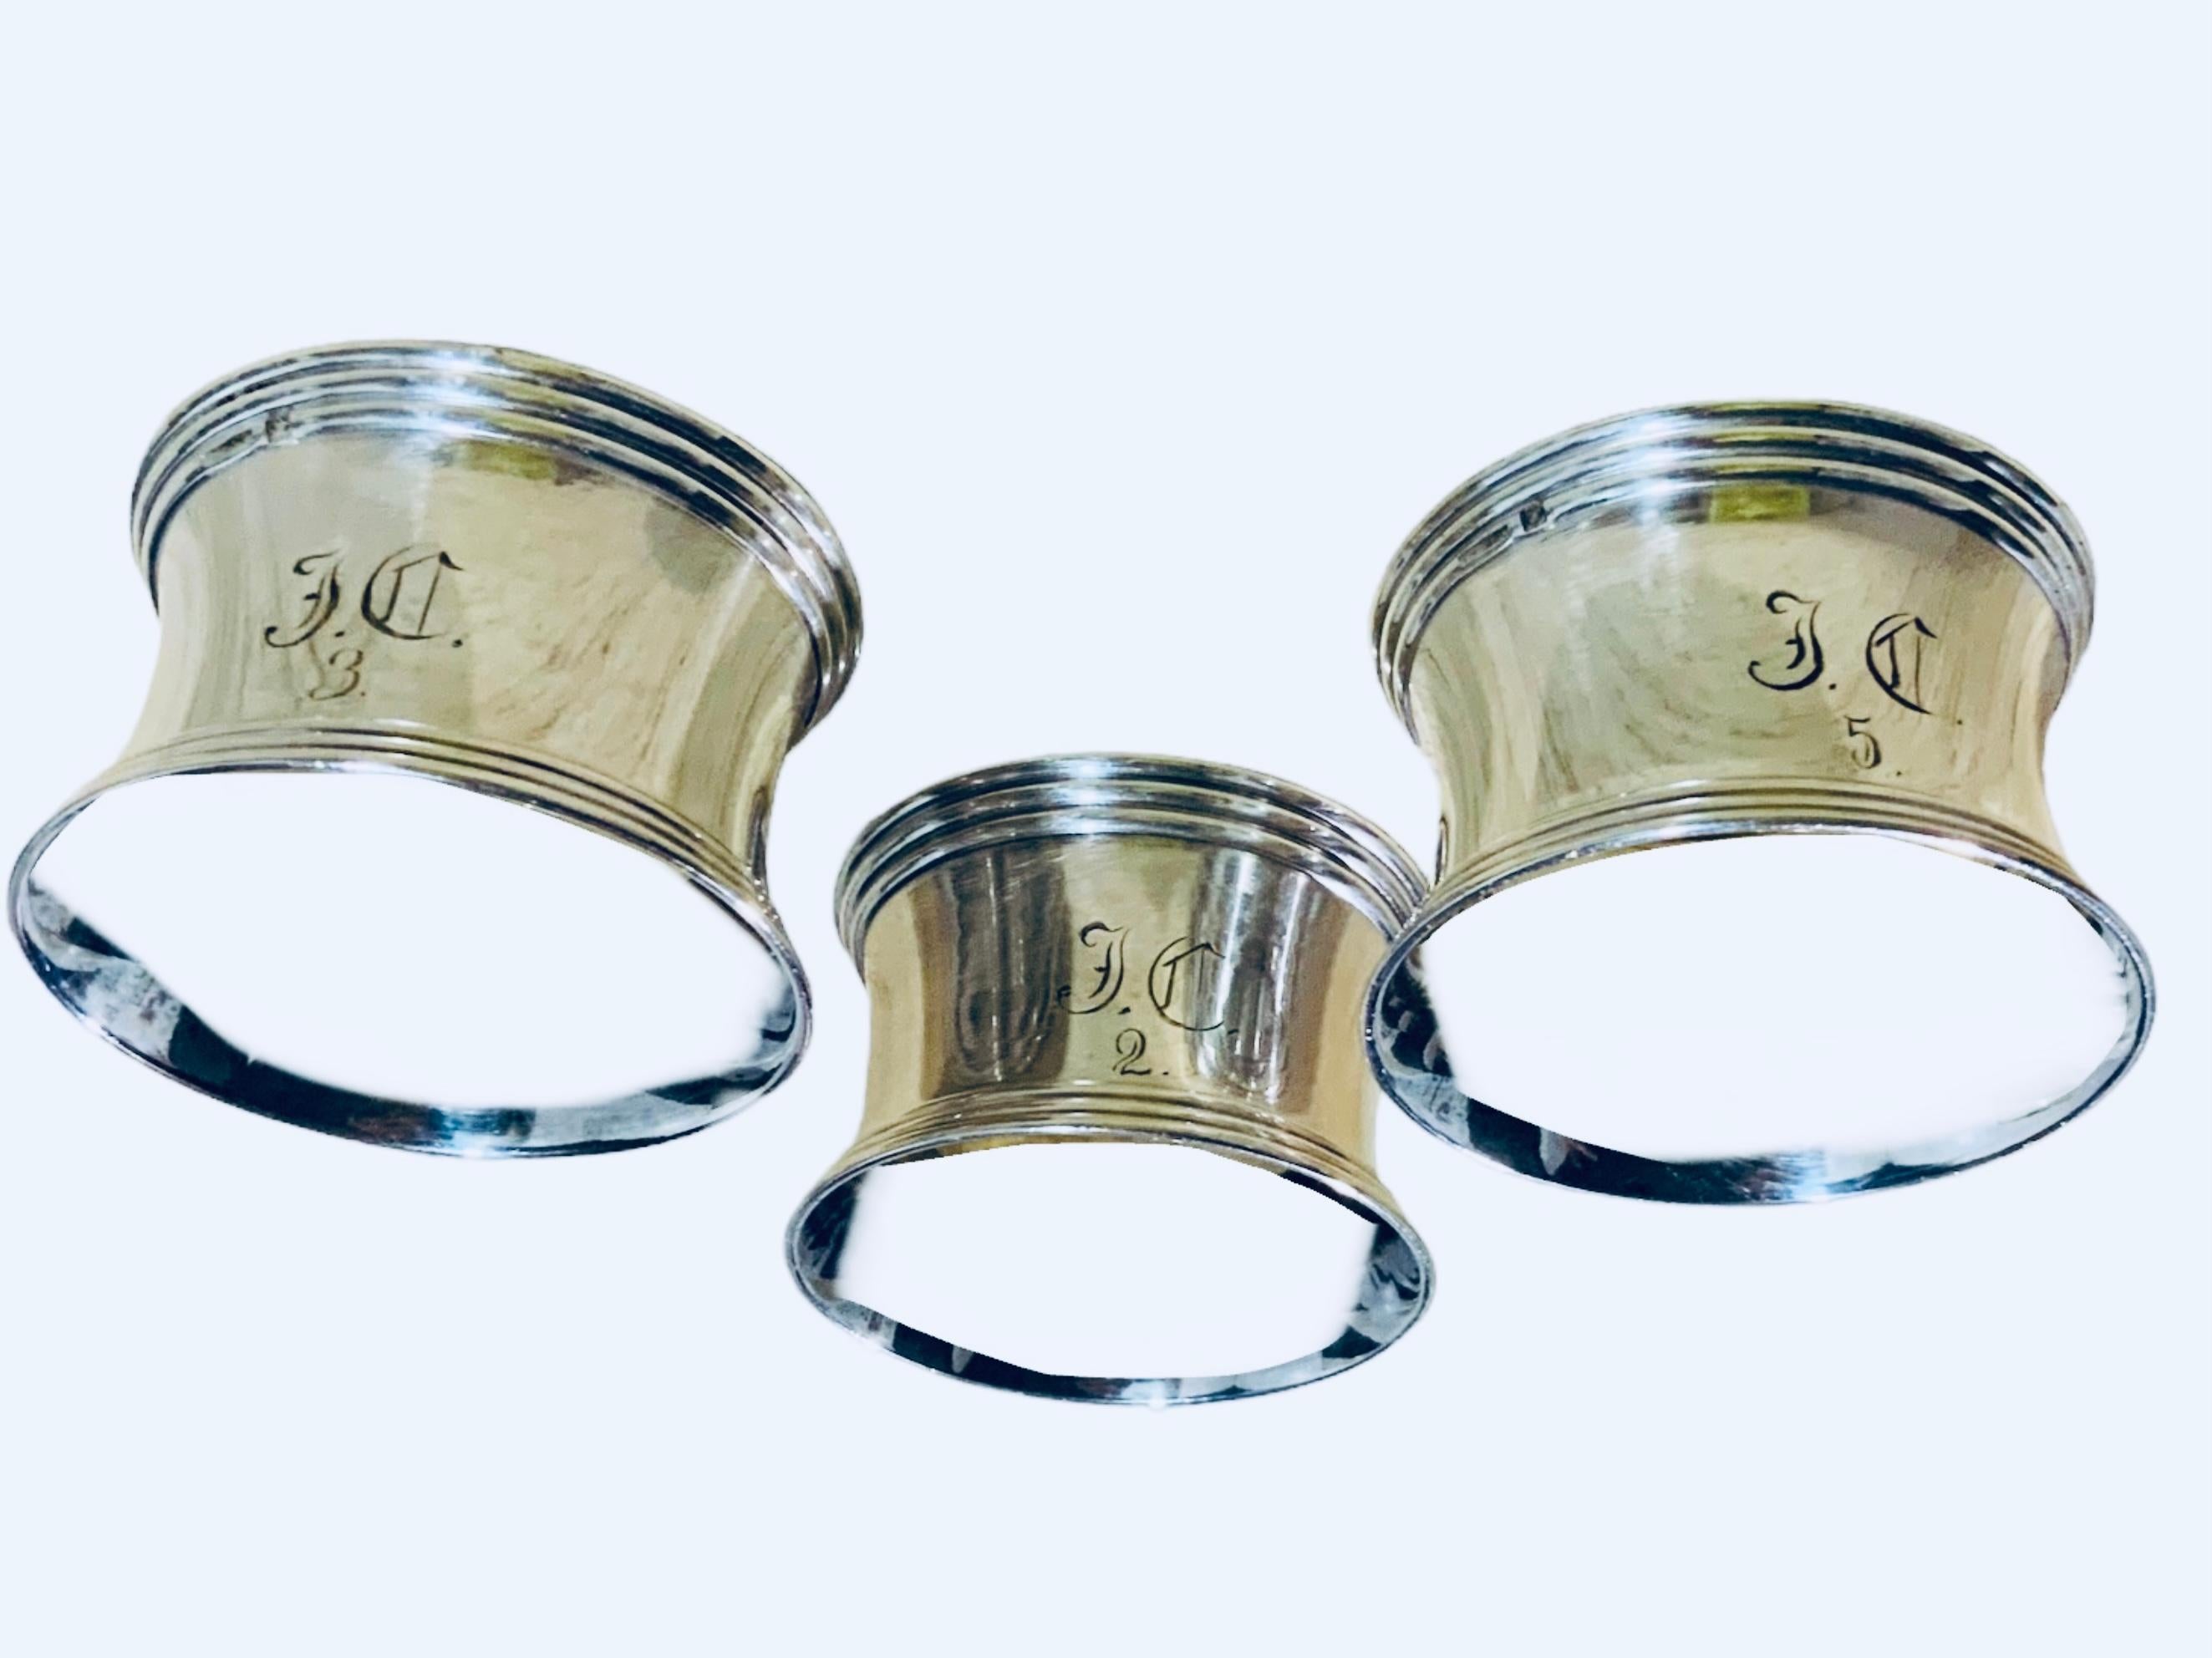 This is a set of three Christofle Silver Plate Napkin’s Rings. It depicts a wide concave shaped rings engraved in the center with the monogram of the gothic letters “J and C” and also the numbers 2, 3 and 5. The rings are adorned with reeded borders